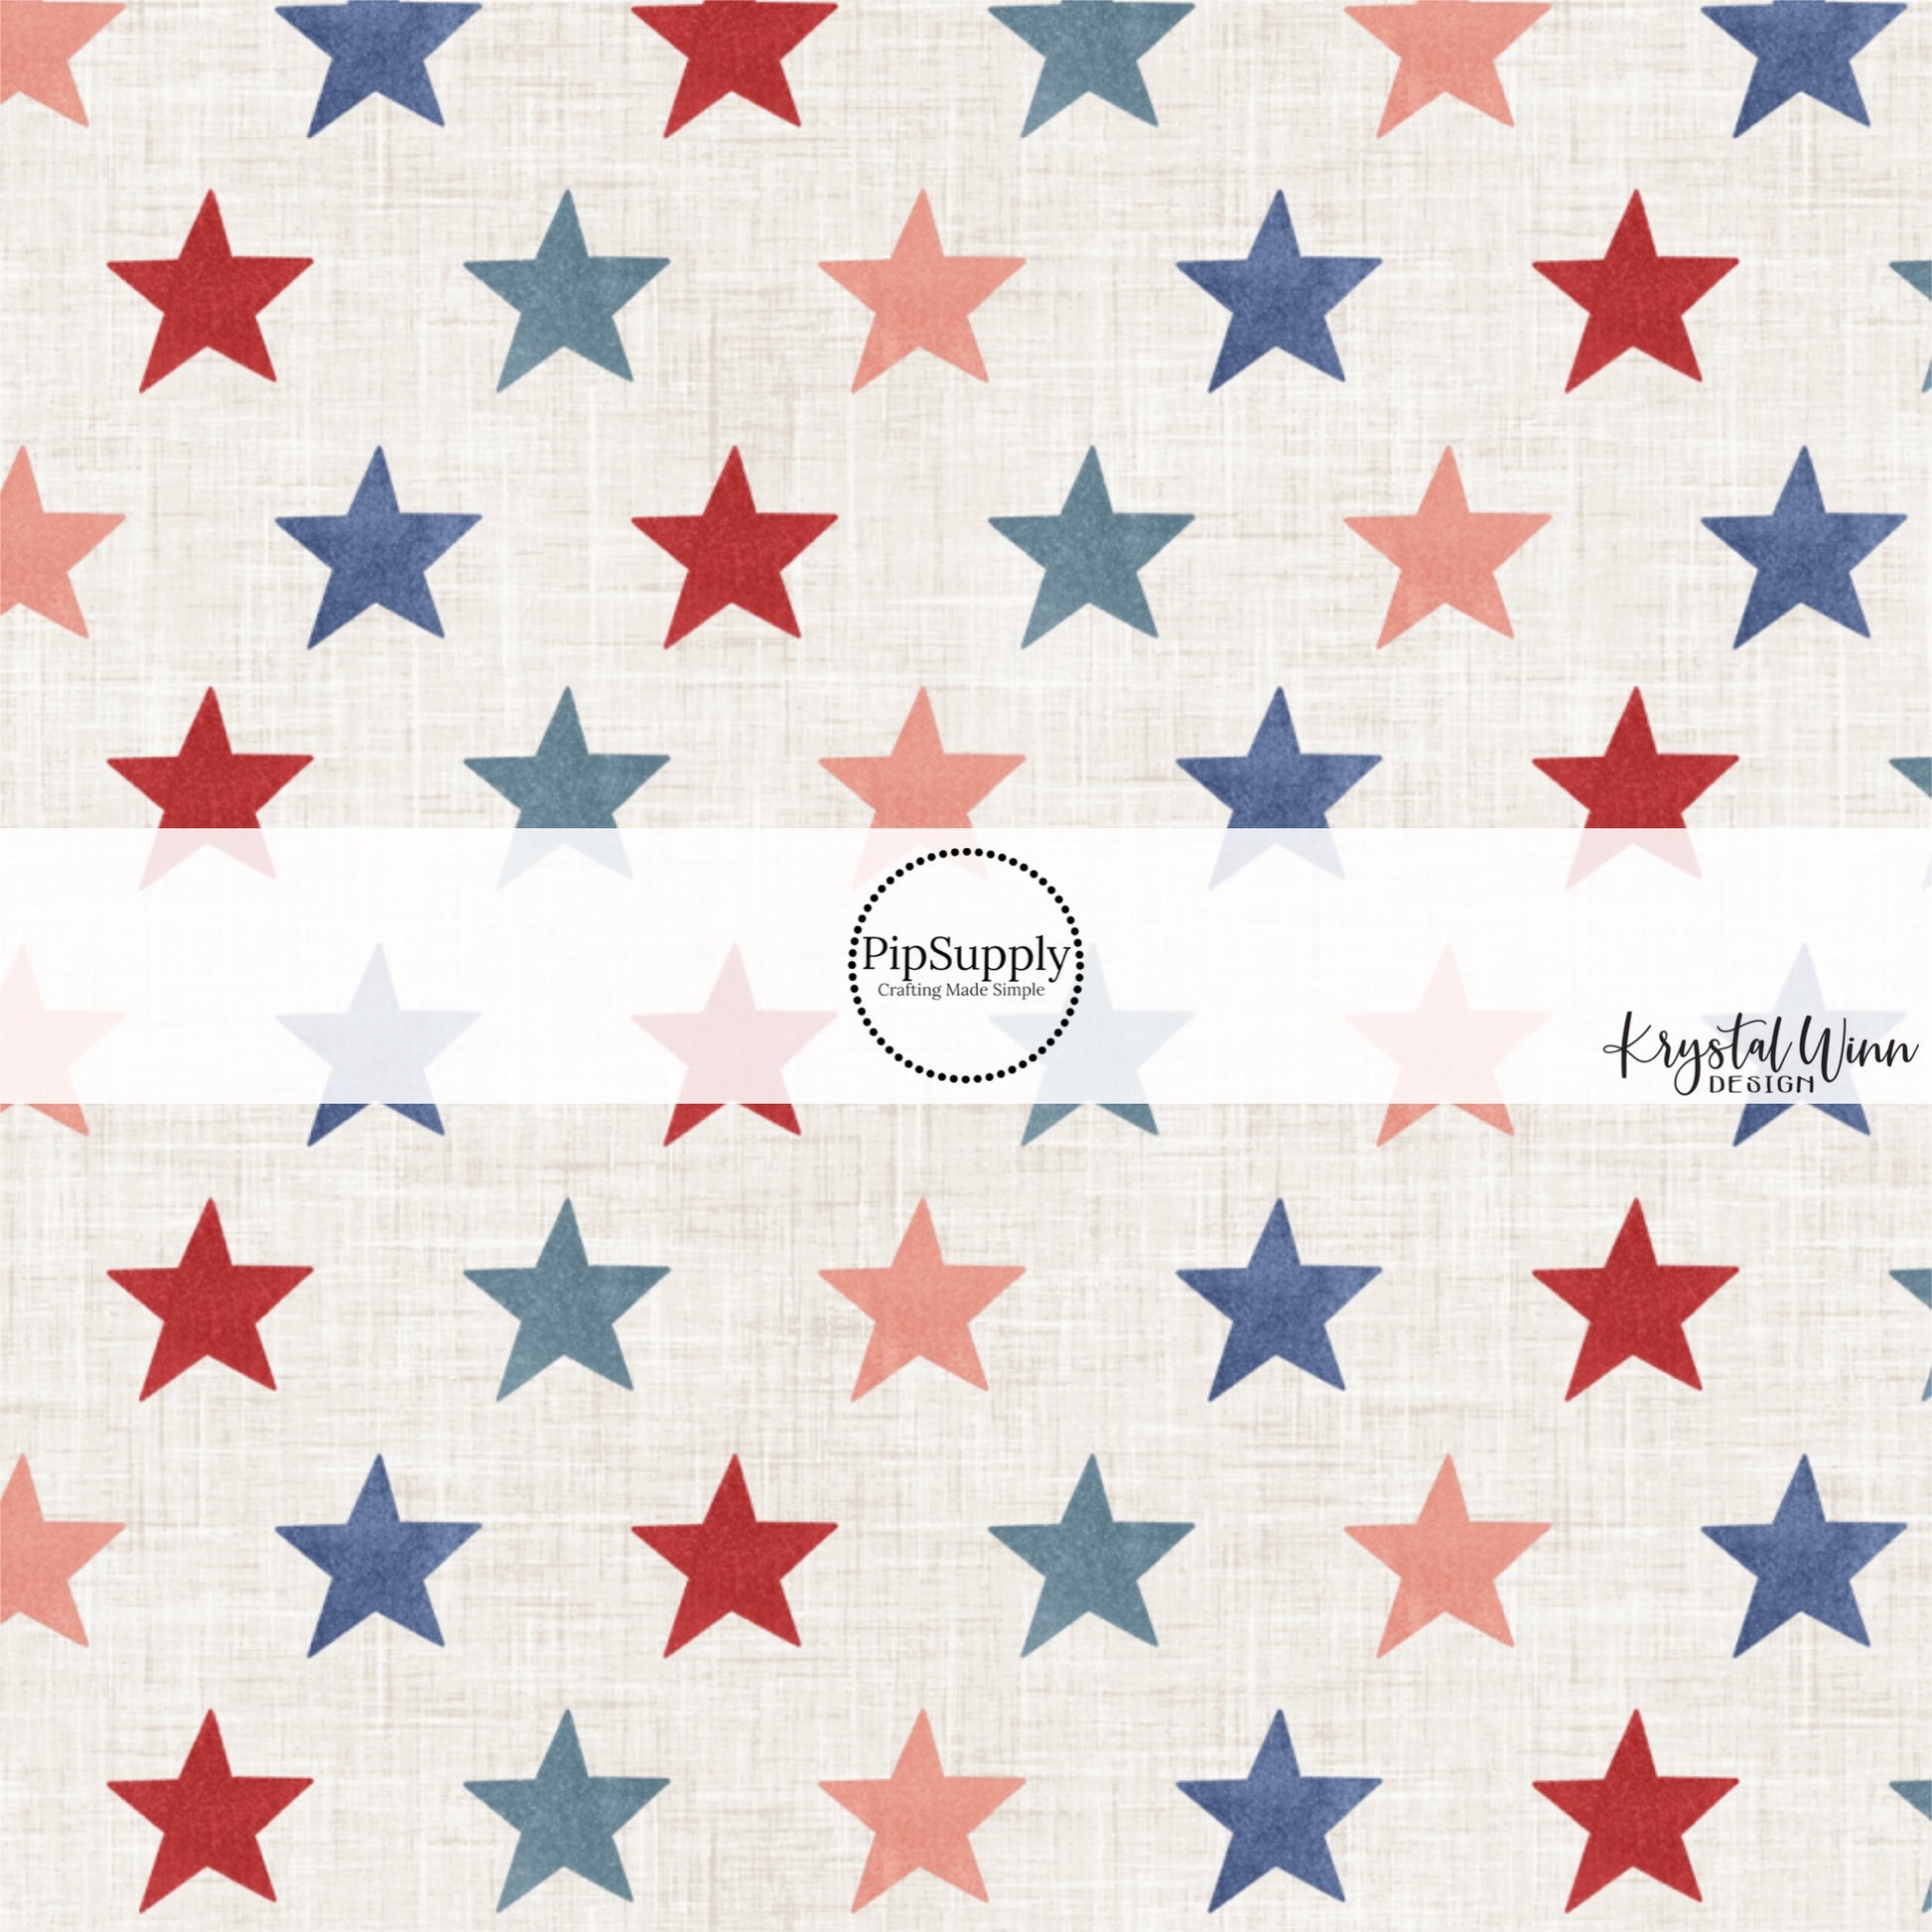 This 4th of July fabric by the yard features patriotic red and blue stars on cream. This fun patriotic themed fabric can be used for all your sewing and crafting needs!